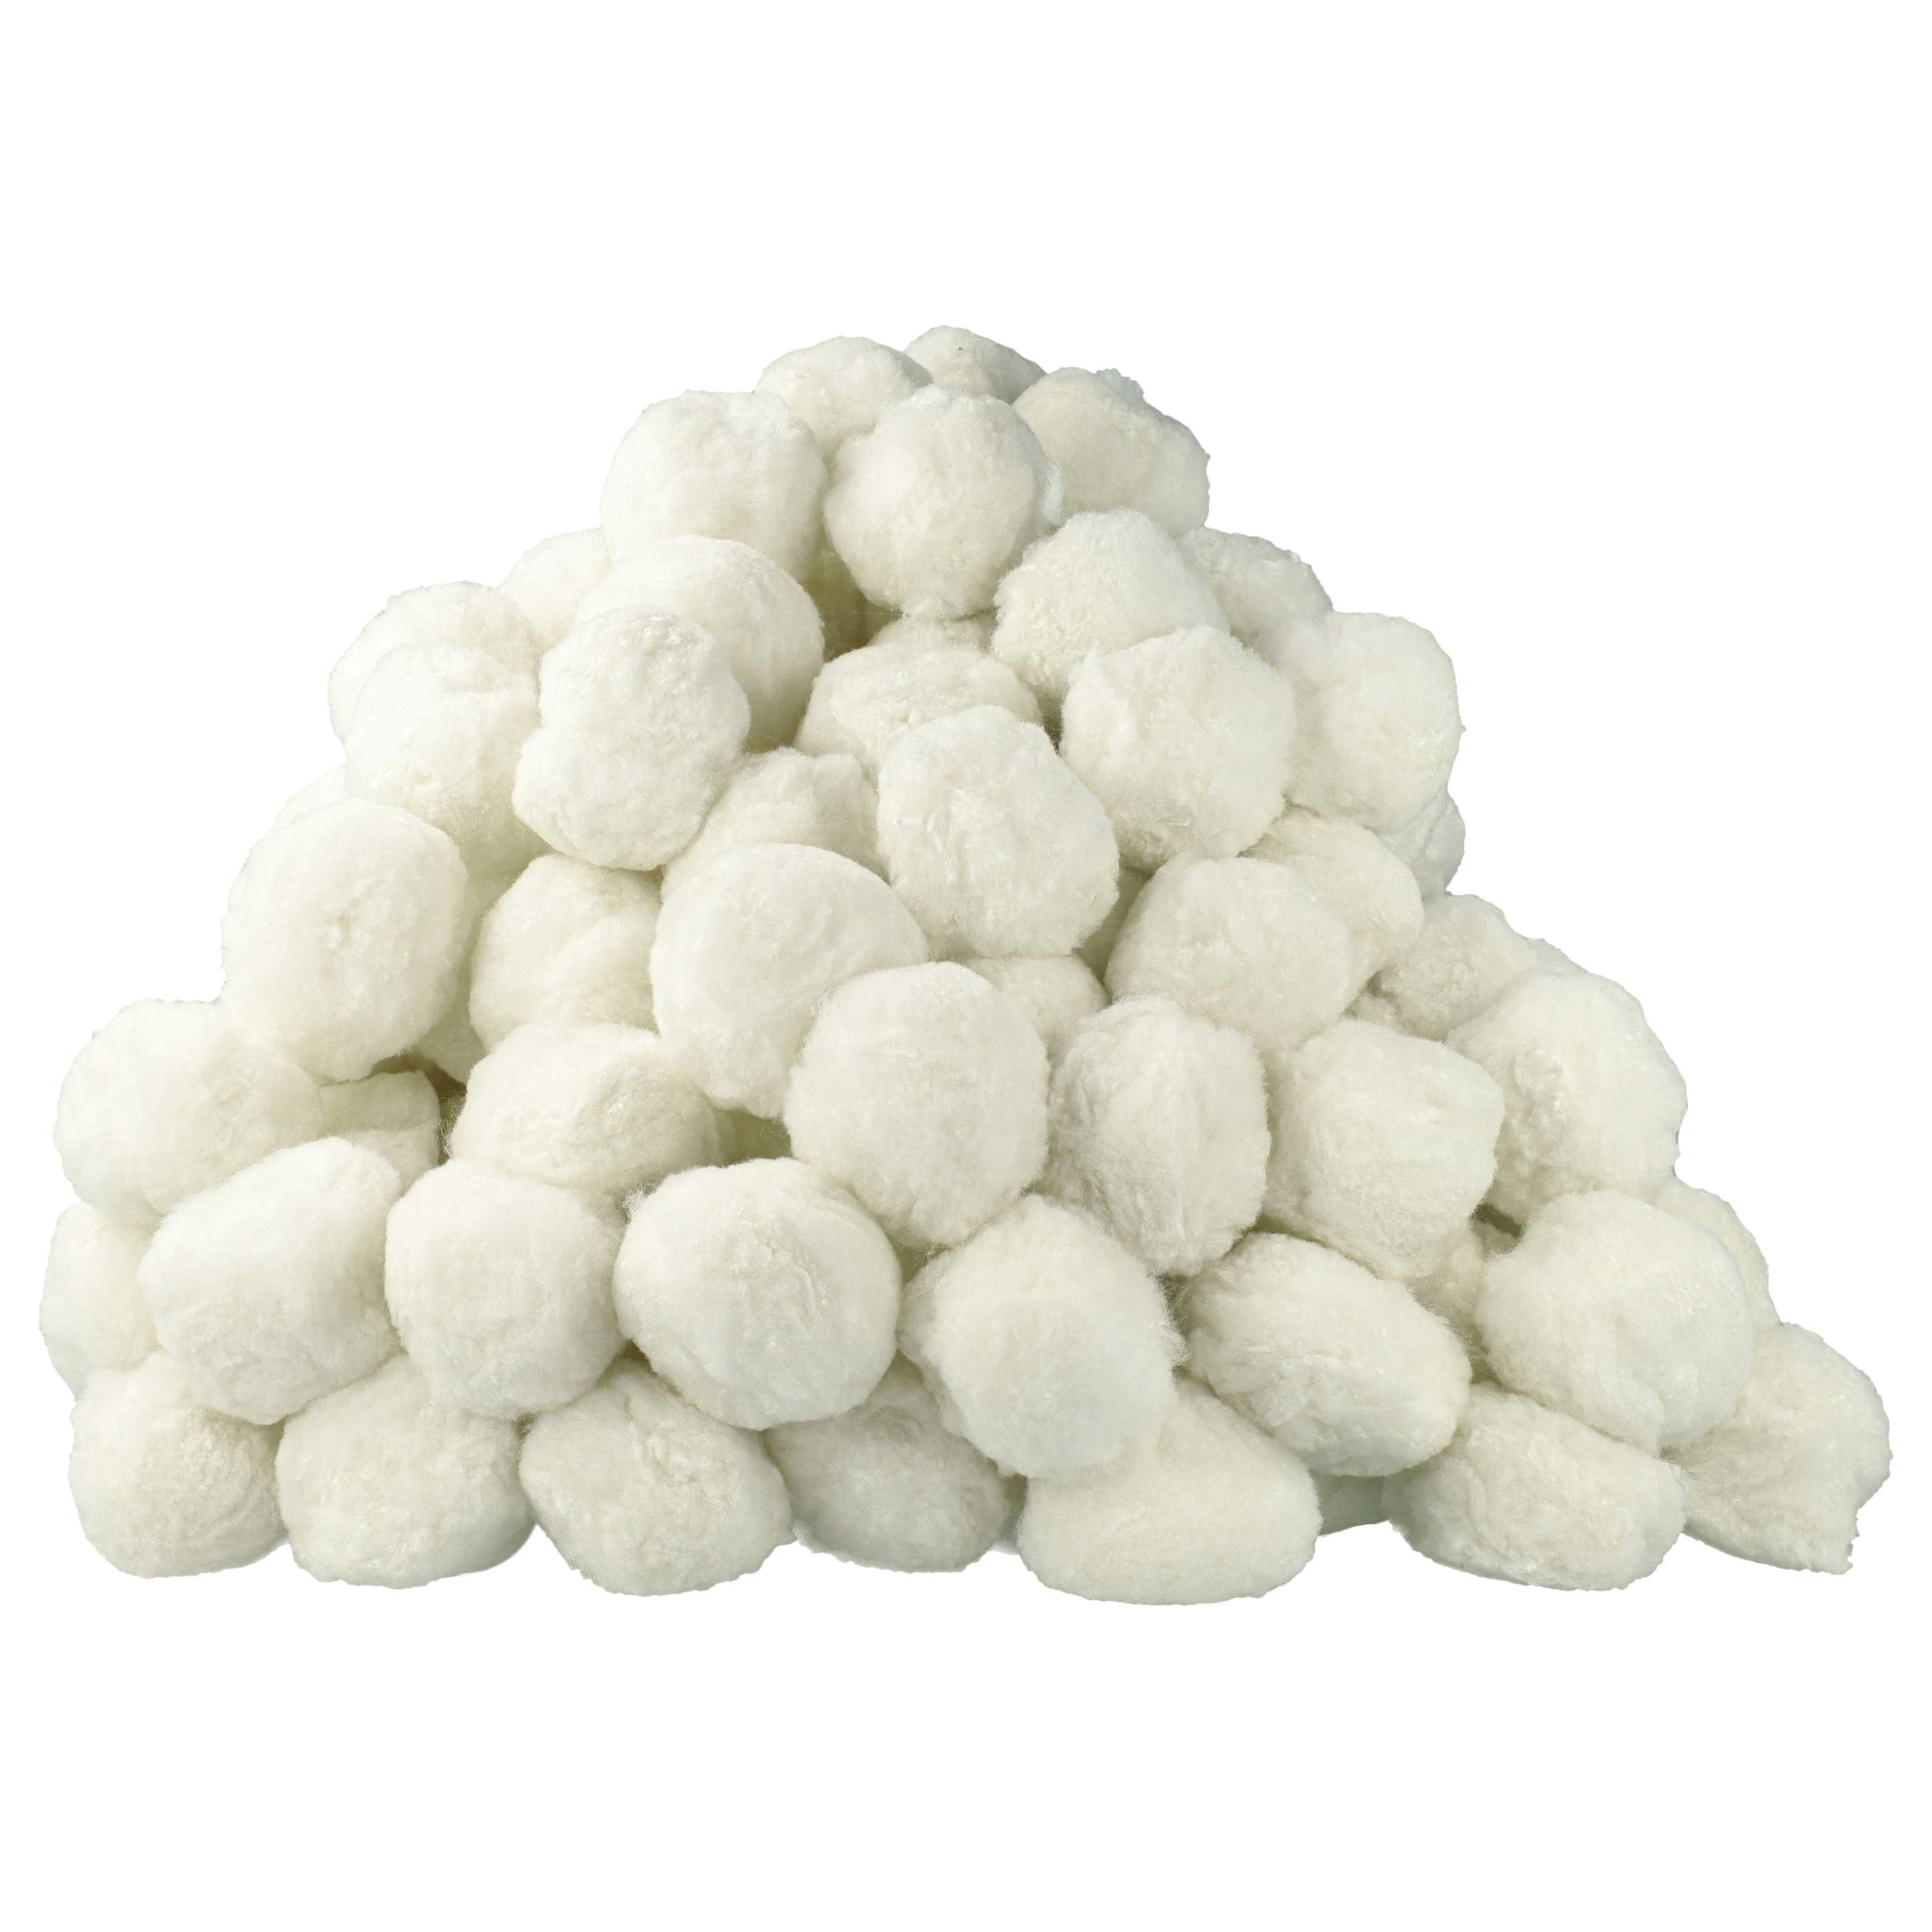 1000 g Filter Balls, Packaged replaces Bestway 58475 for Intex Pool Filtration System etc. - 50 mm